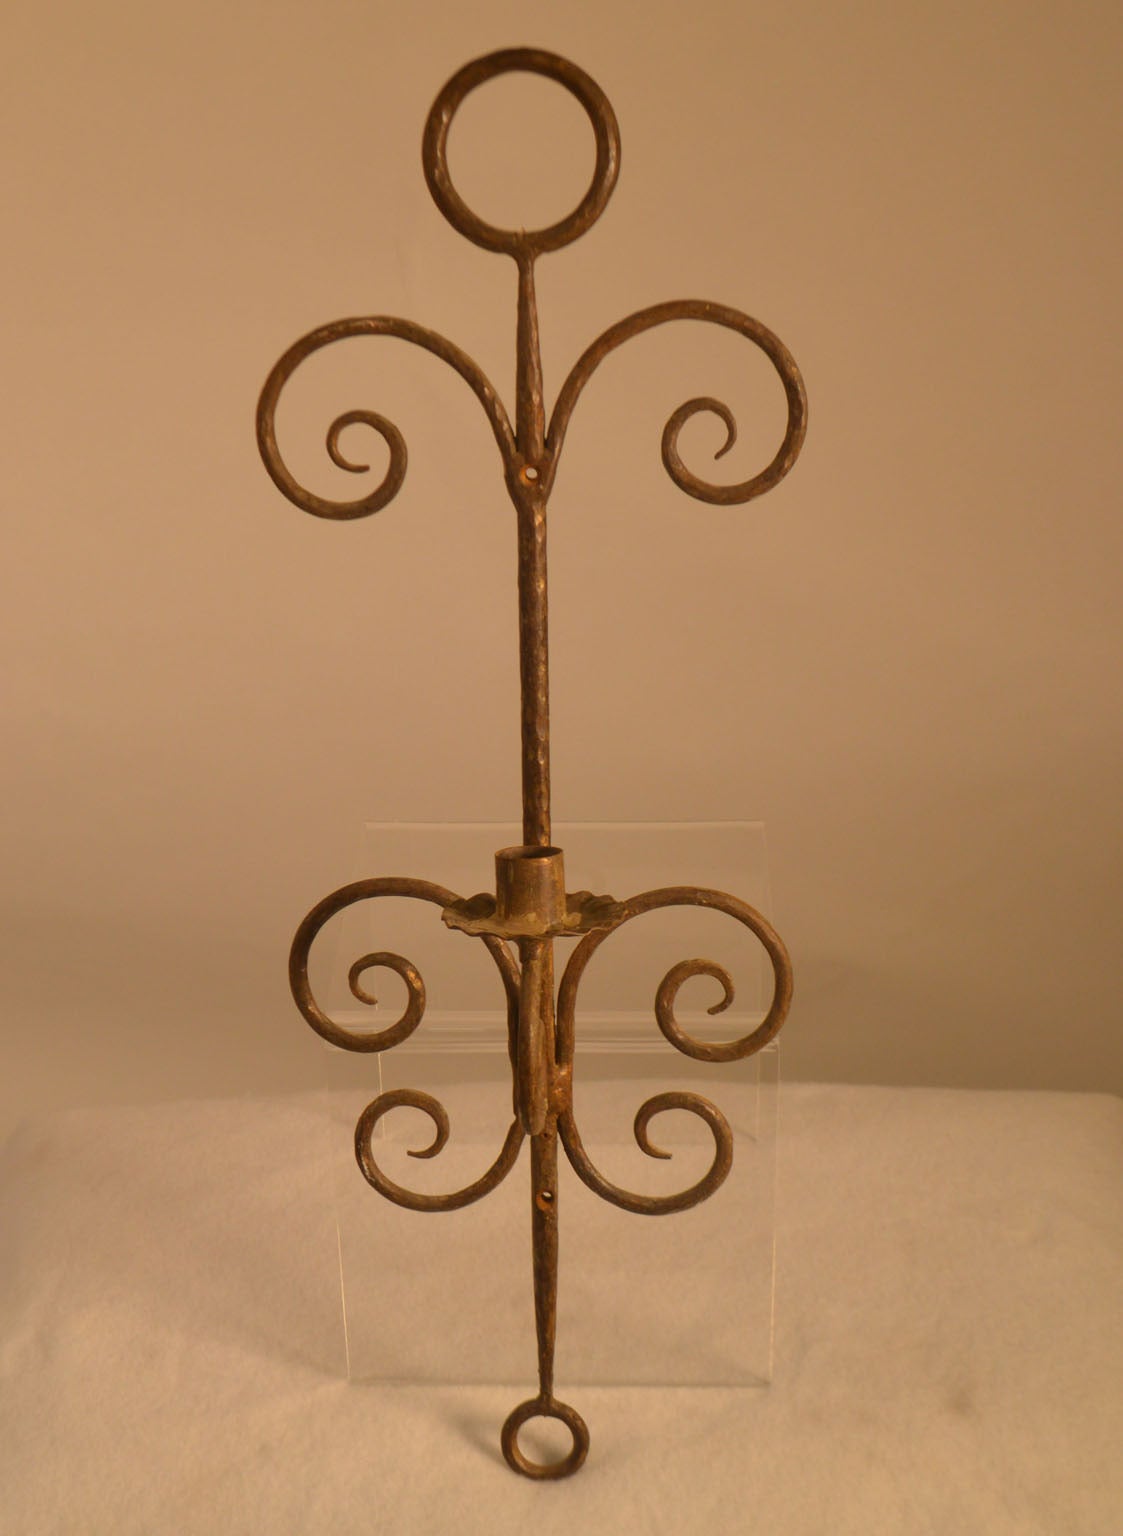 Pair of wrought iron sconces with one arm. Three sets of two sconces available. $650.00 per set of two.